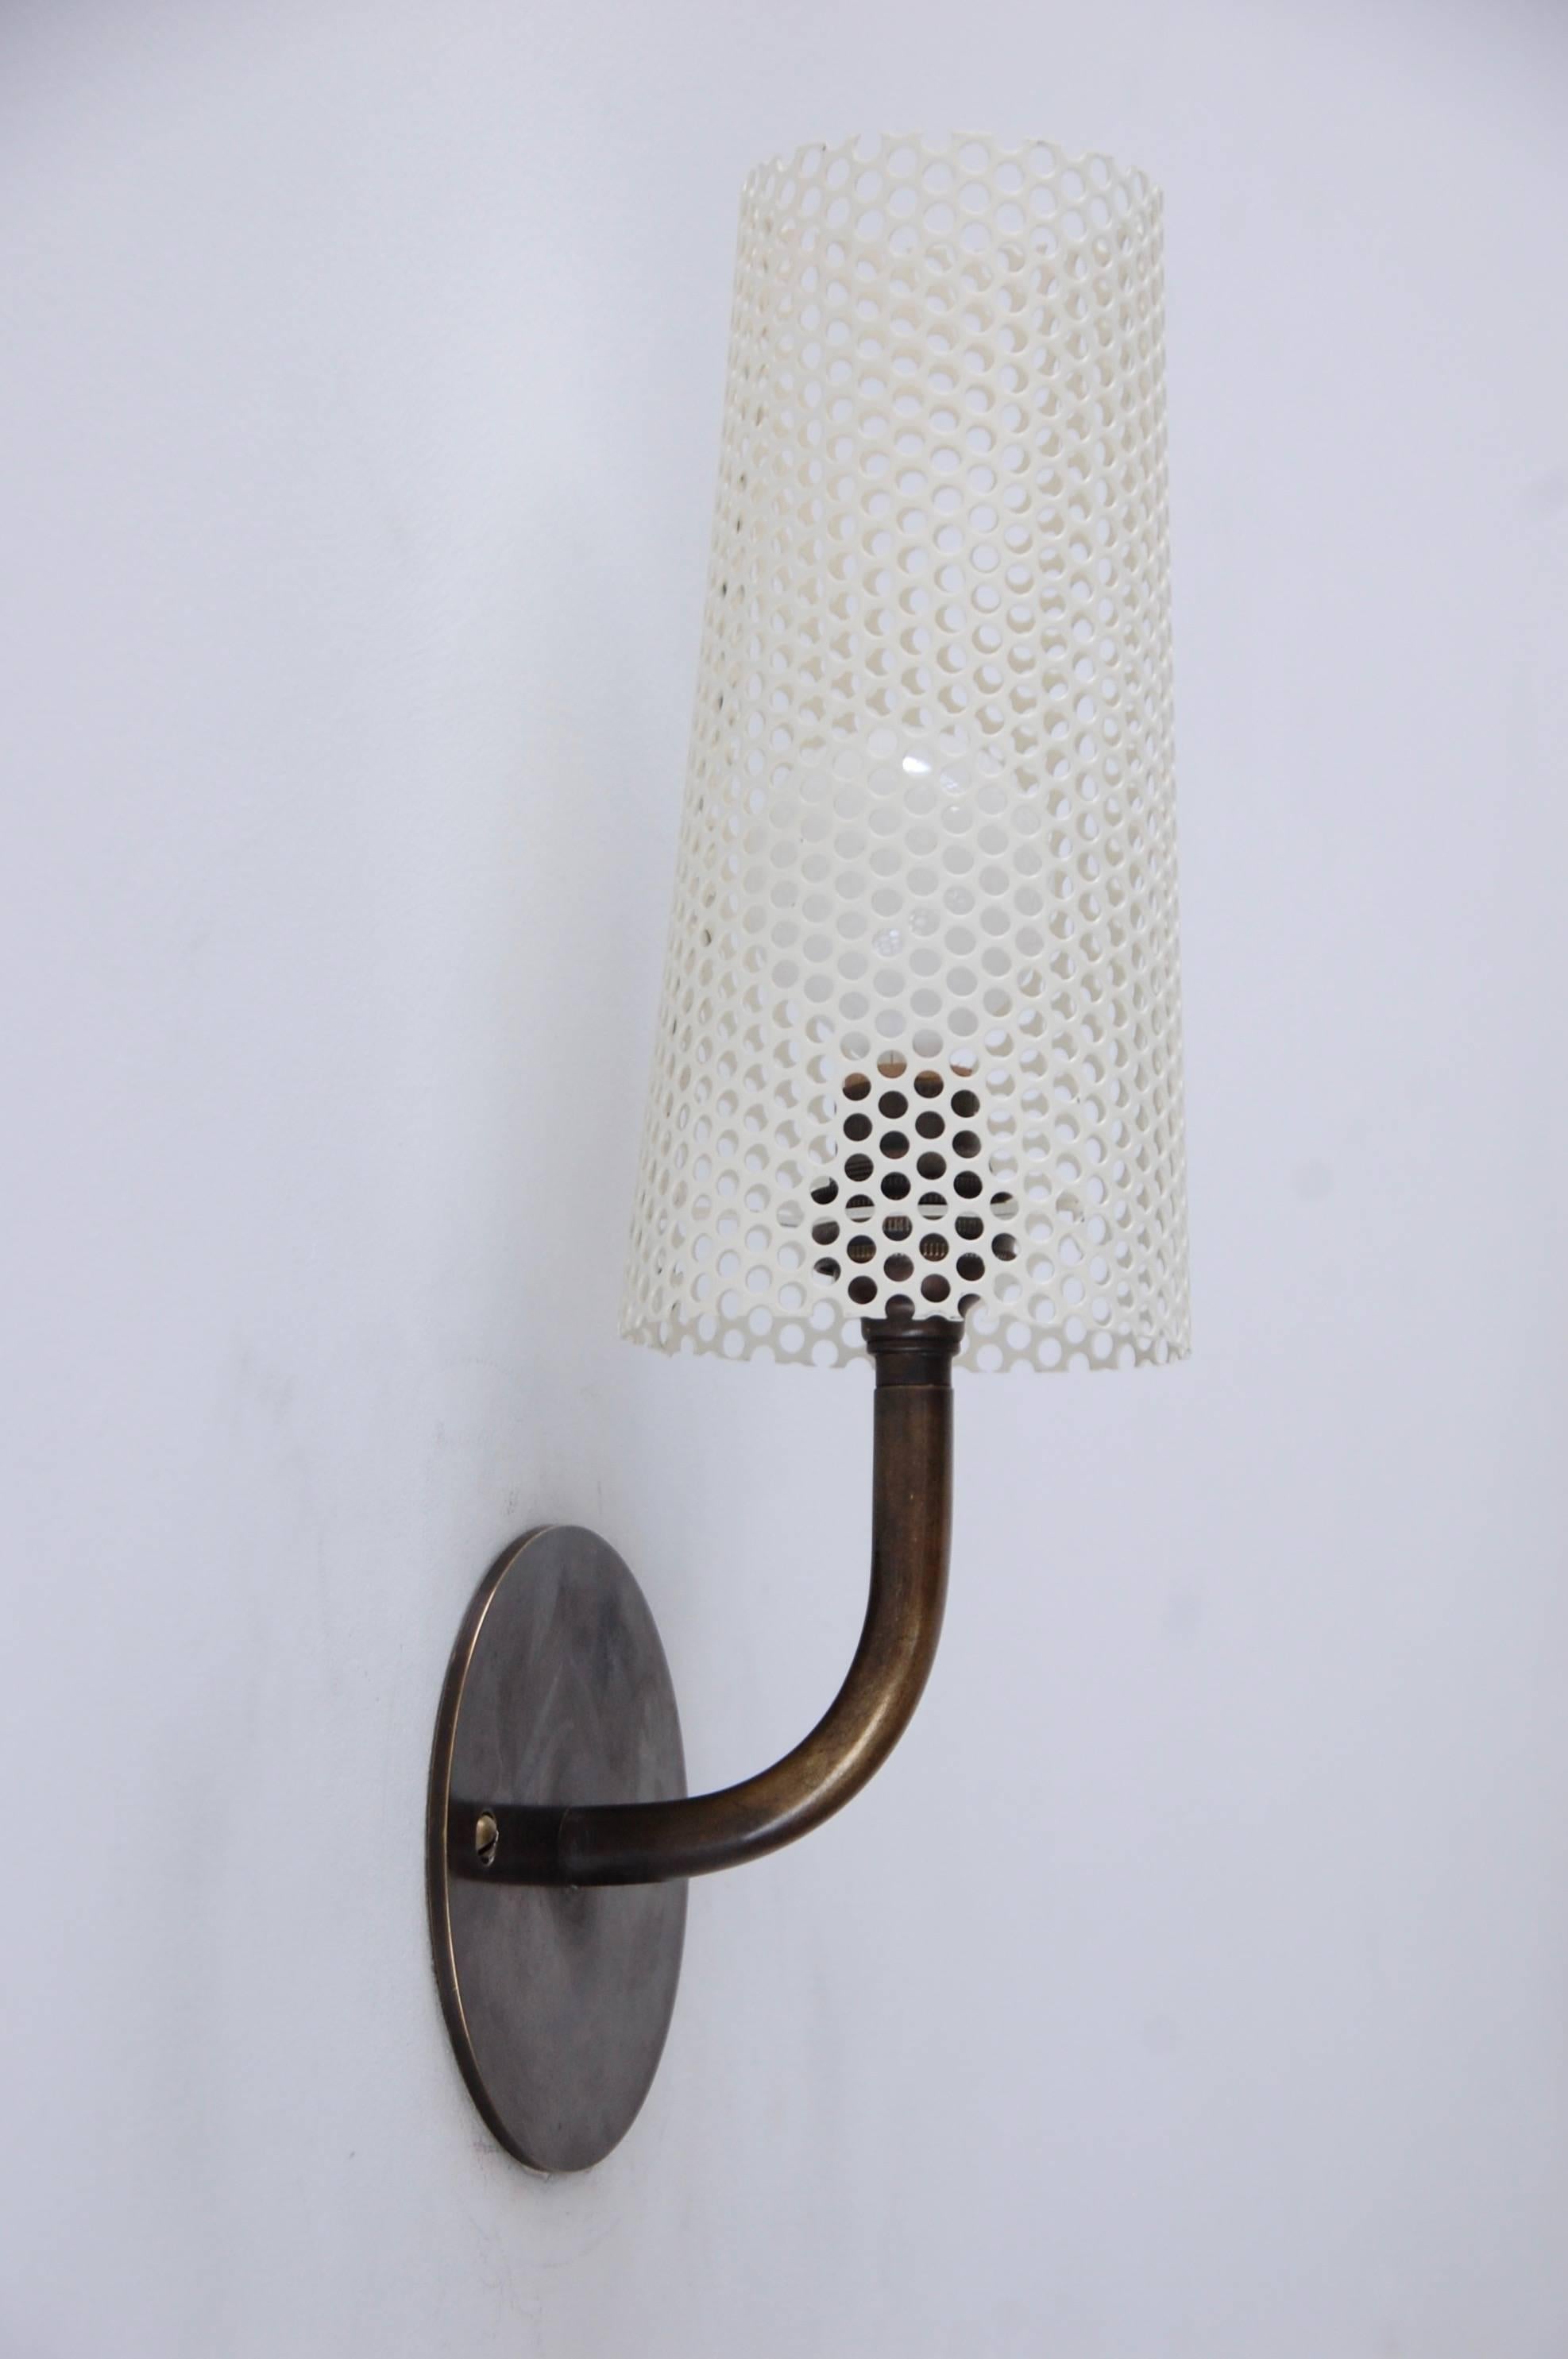 Sharp looking perforated sconces in the style of French designer Disderot. In perforated painted steel and brass. Can be wired for anywhere in the world. Light bulb included with order. 
Measurements:
4